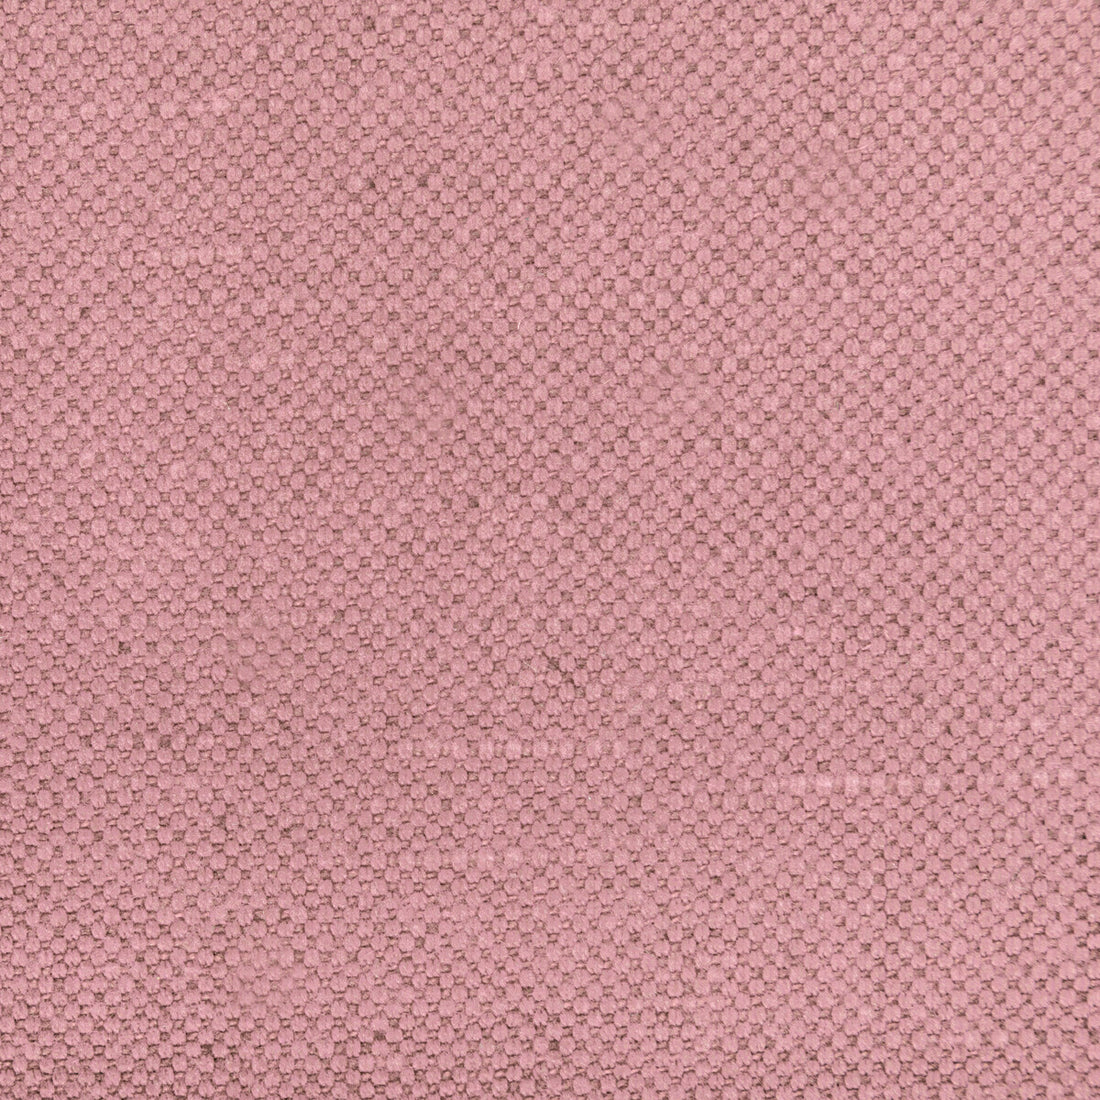 Carson fabric in thistle color - pattern 36282.110.0 - by Kravet Basics